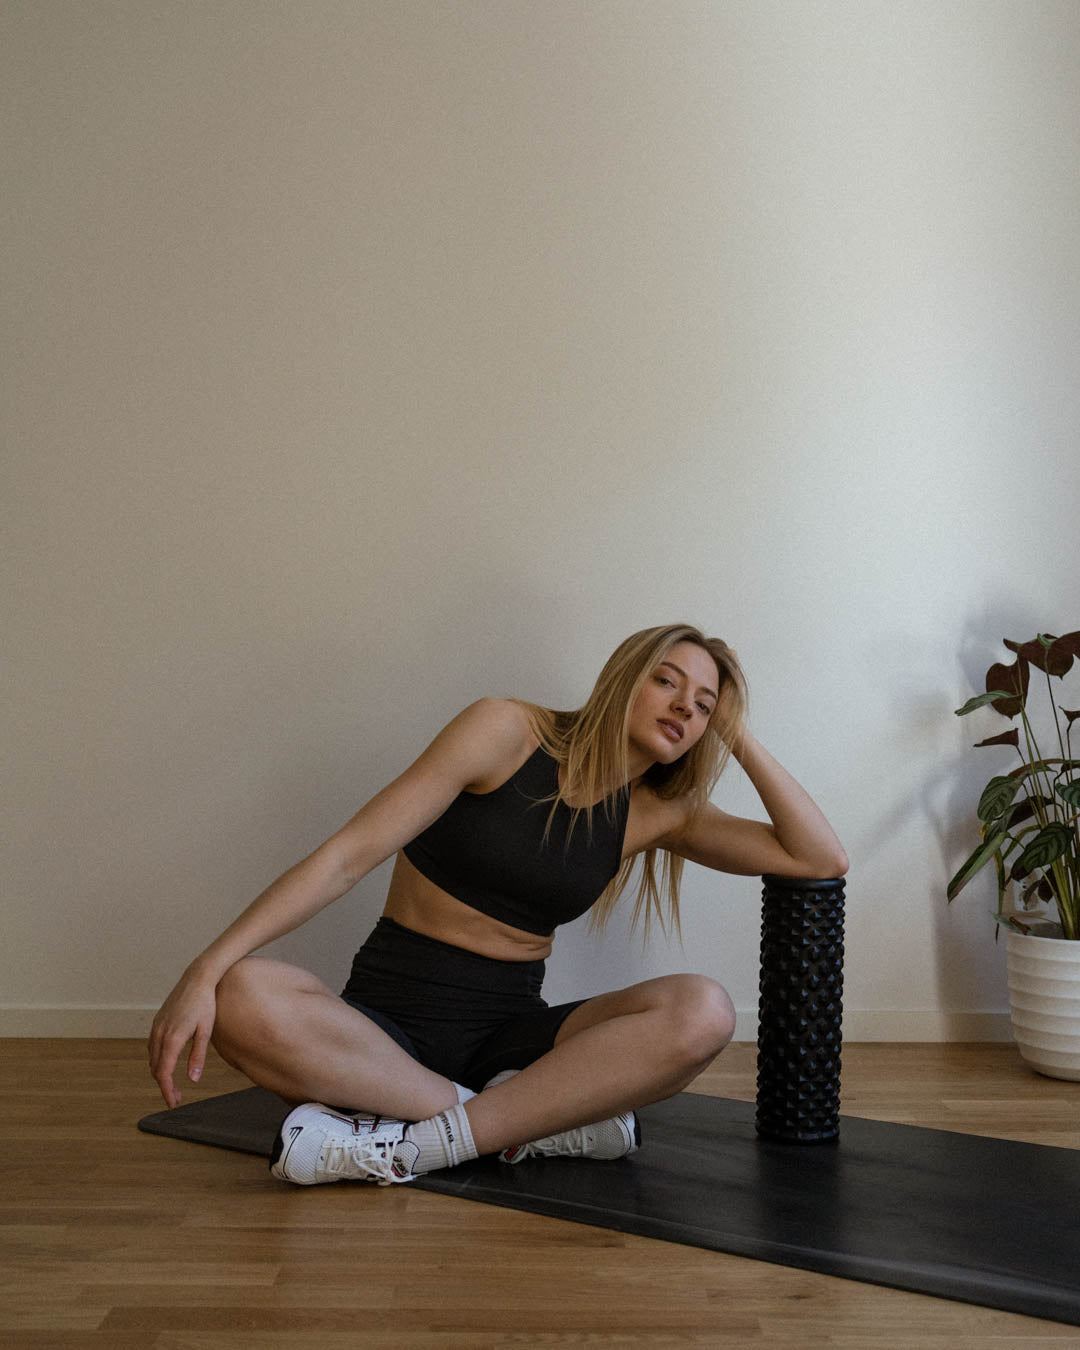 Blonde woman in sports bra and biker shorts sitting on a yoga mat leaning on a foam roller